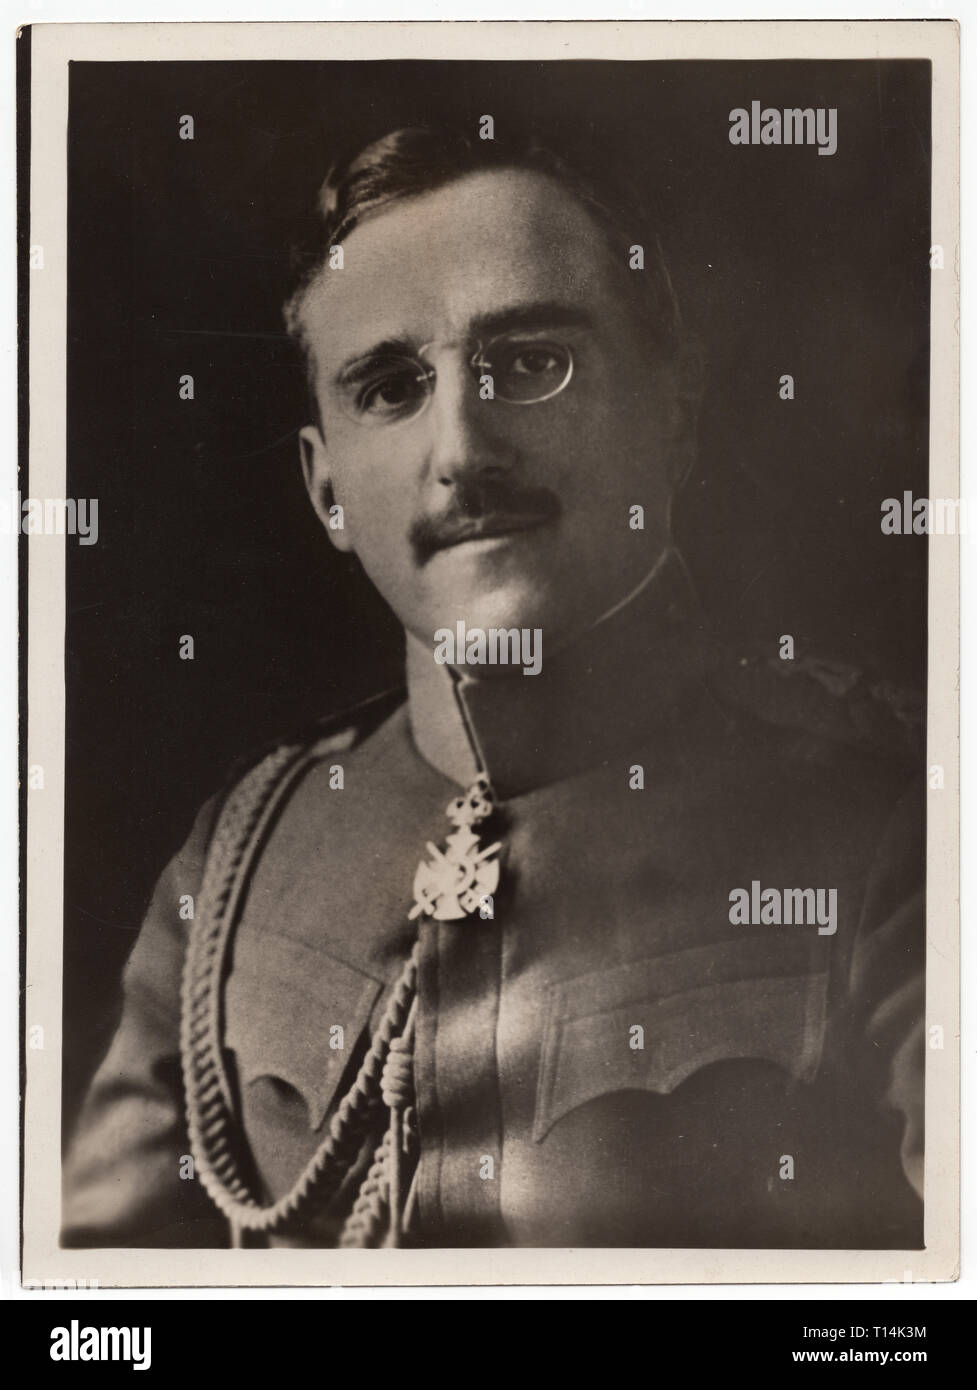 King Alexander I of Yugoslavia (1888-1934) depicted in the undated black and white vintage photograph by an unknown photographer. Courtesy of the Azoor Photo Collection. Stock Photo